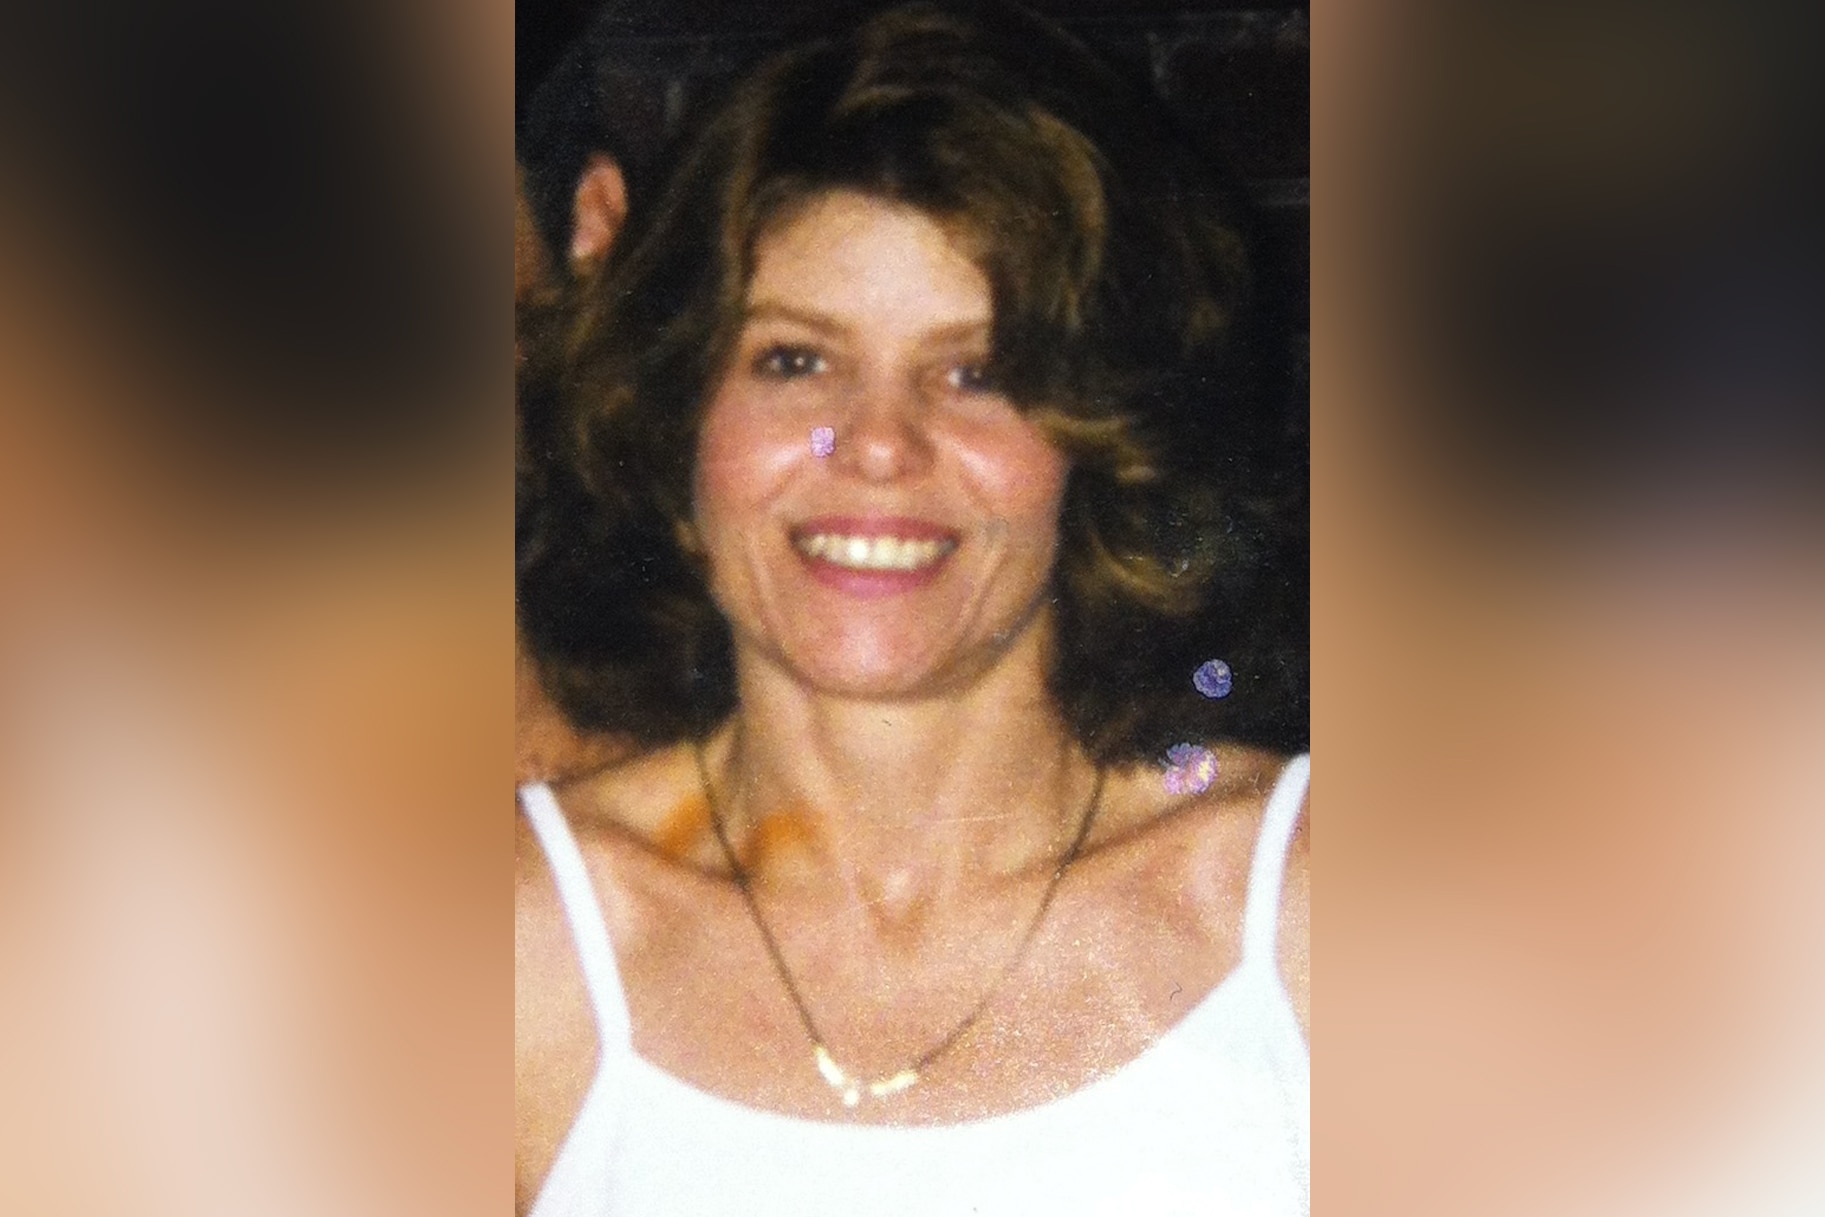 A photo of missing woman, Janet Luxford